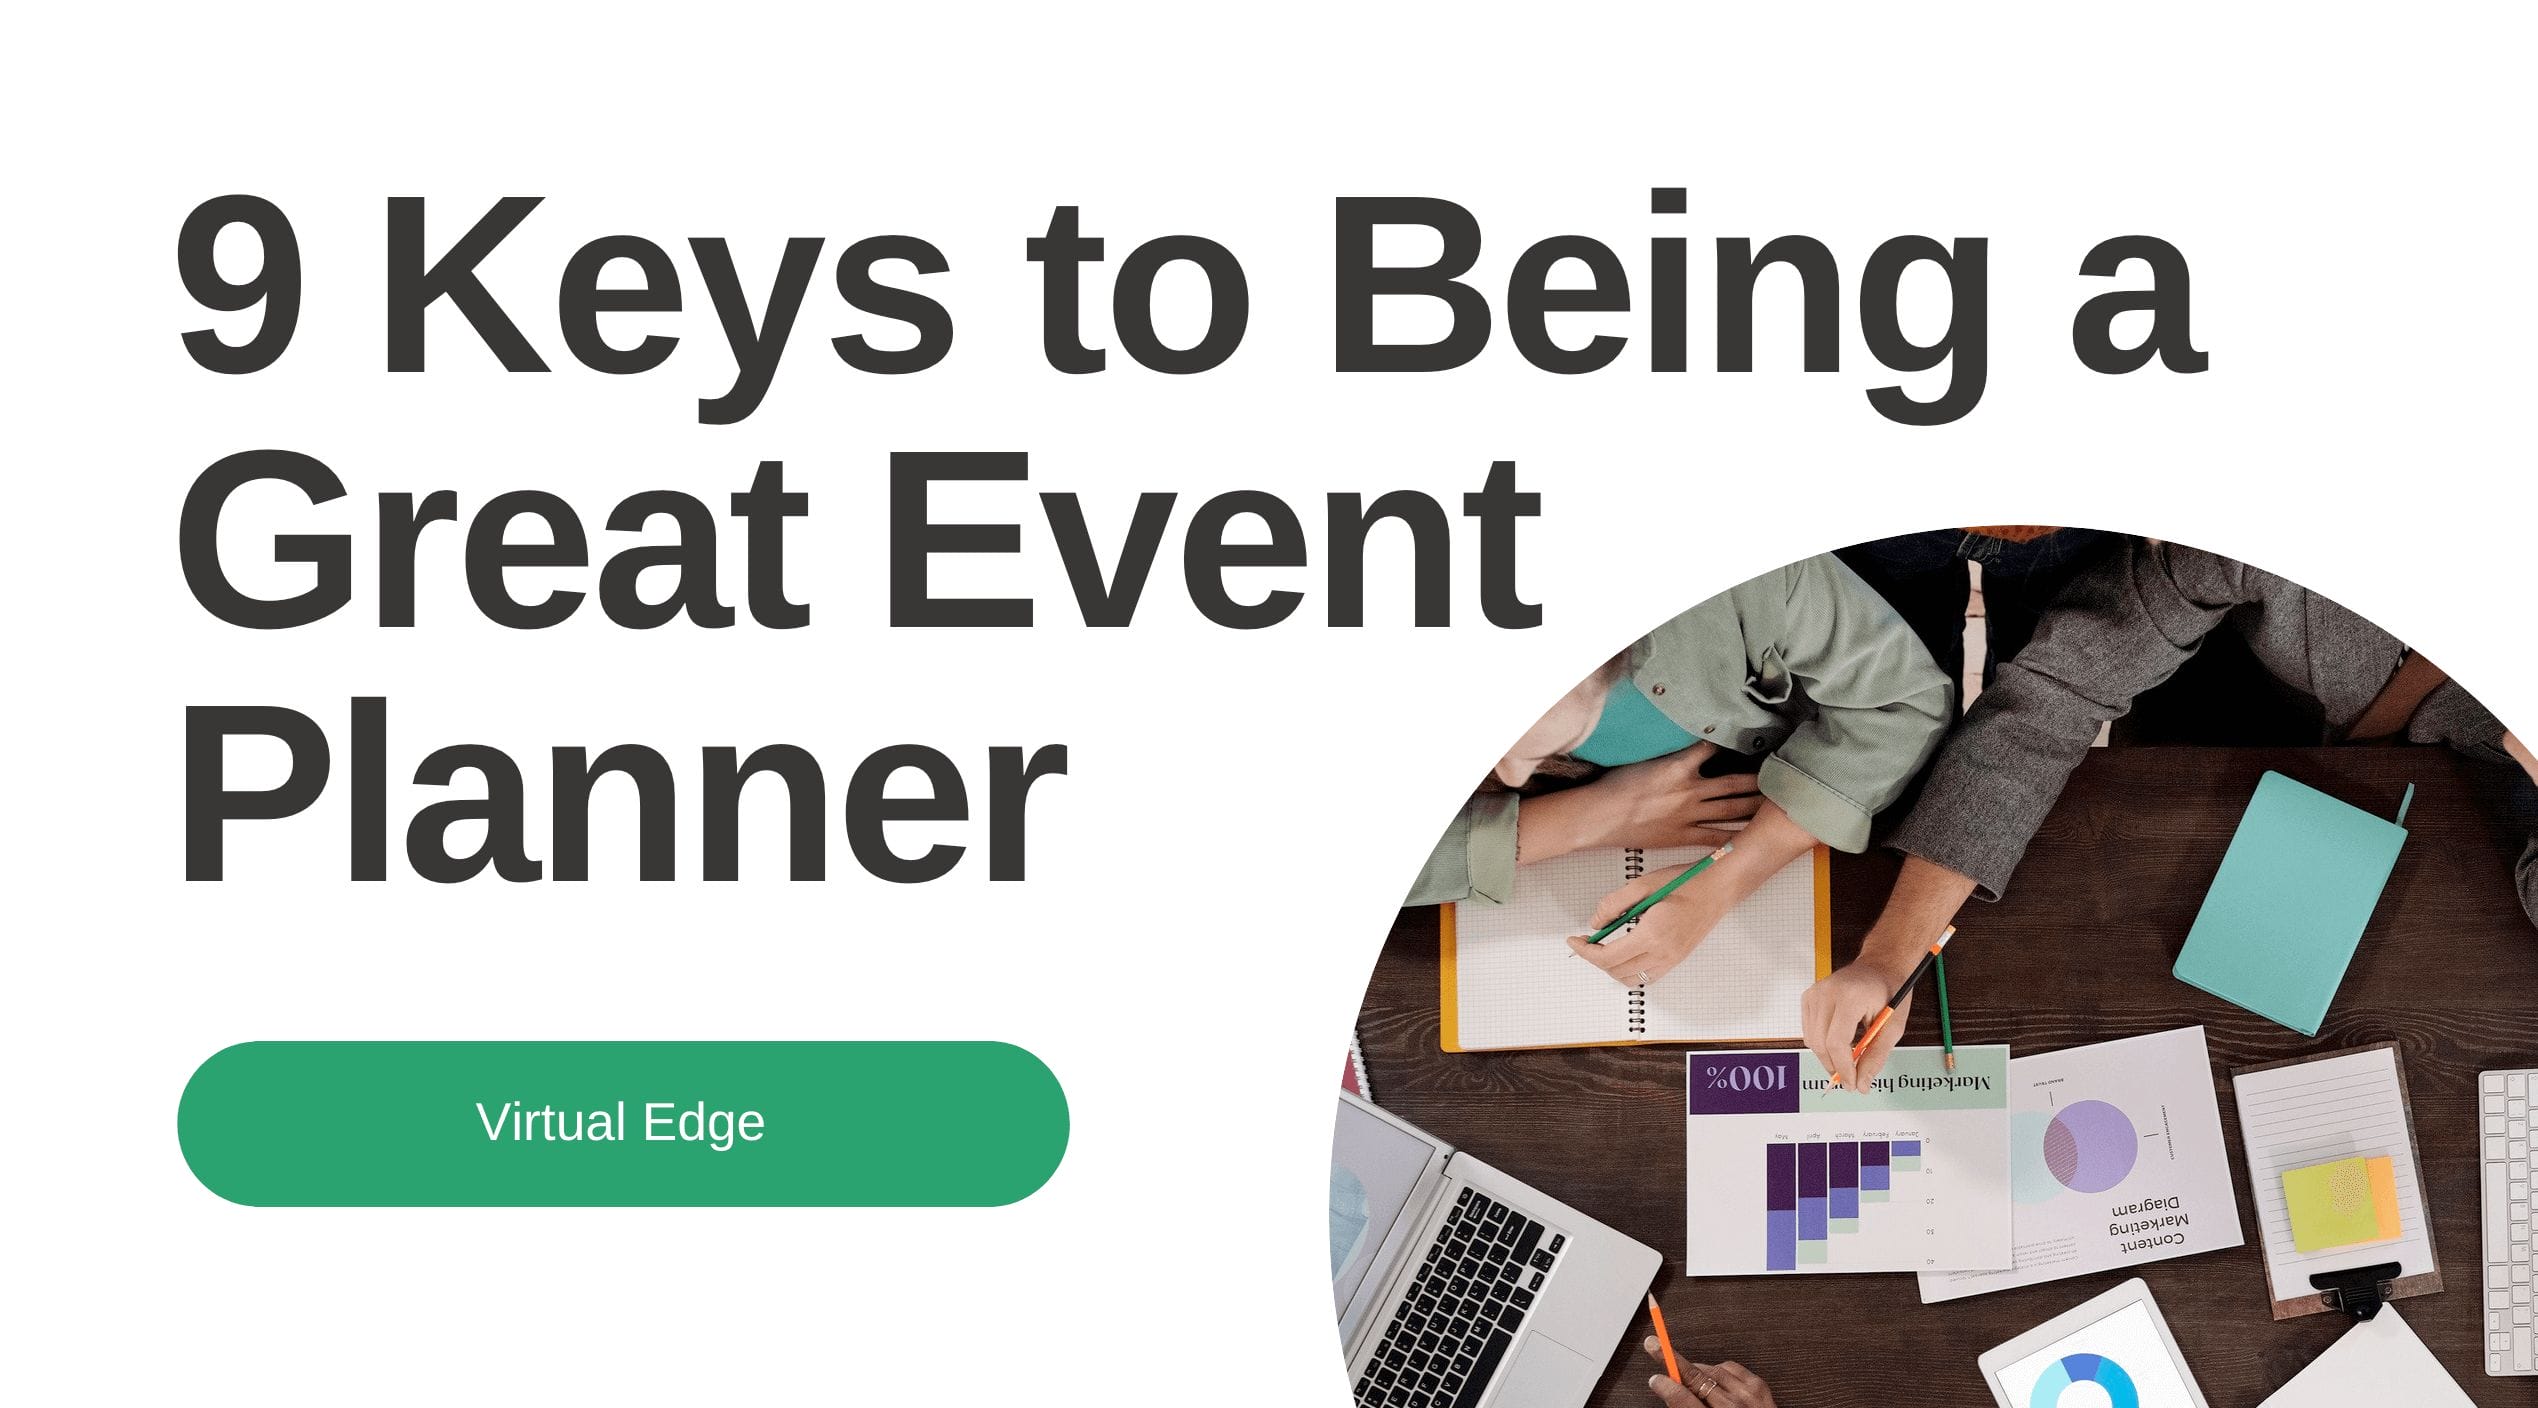 9 Keys to Being a Great Event Planner